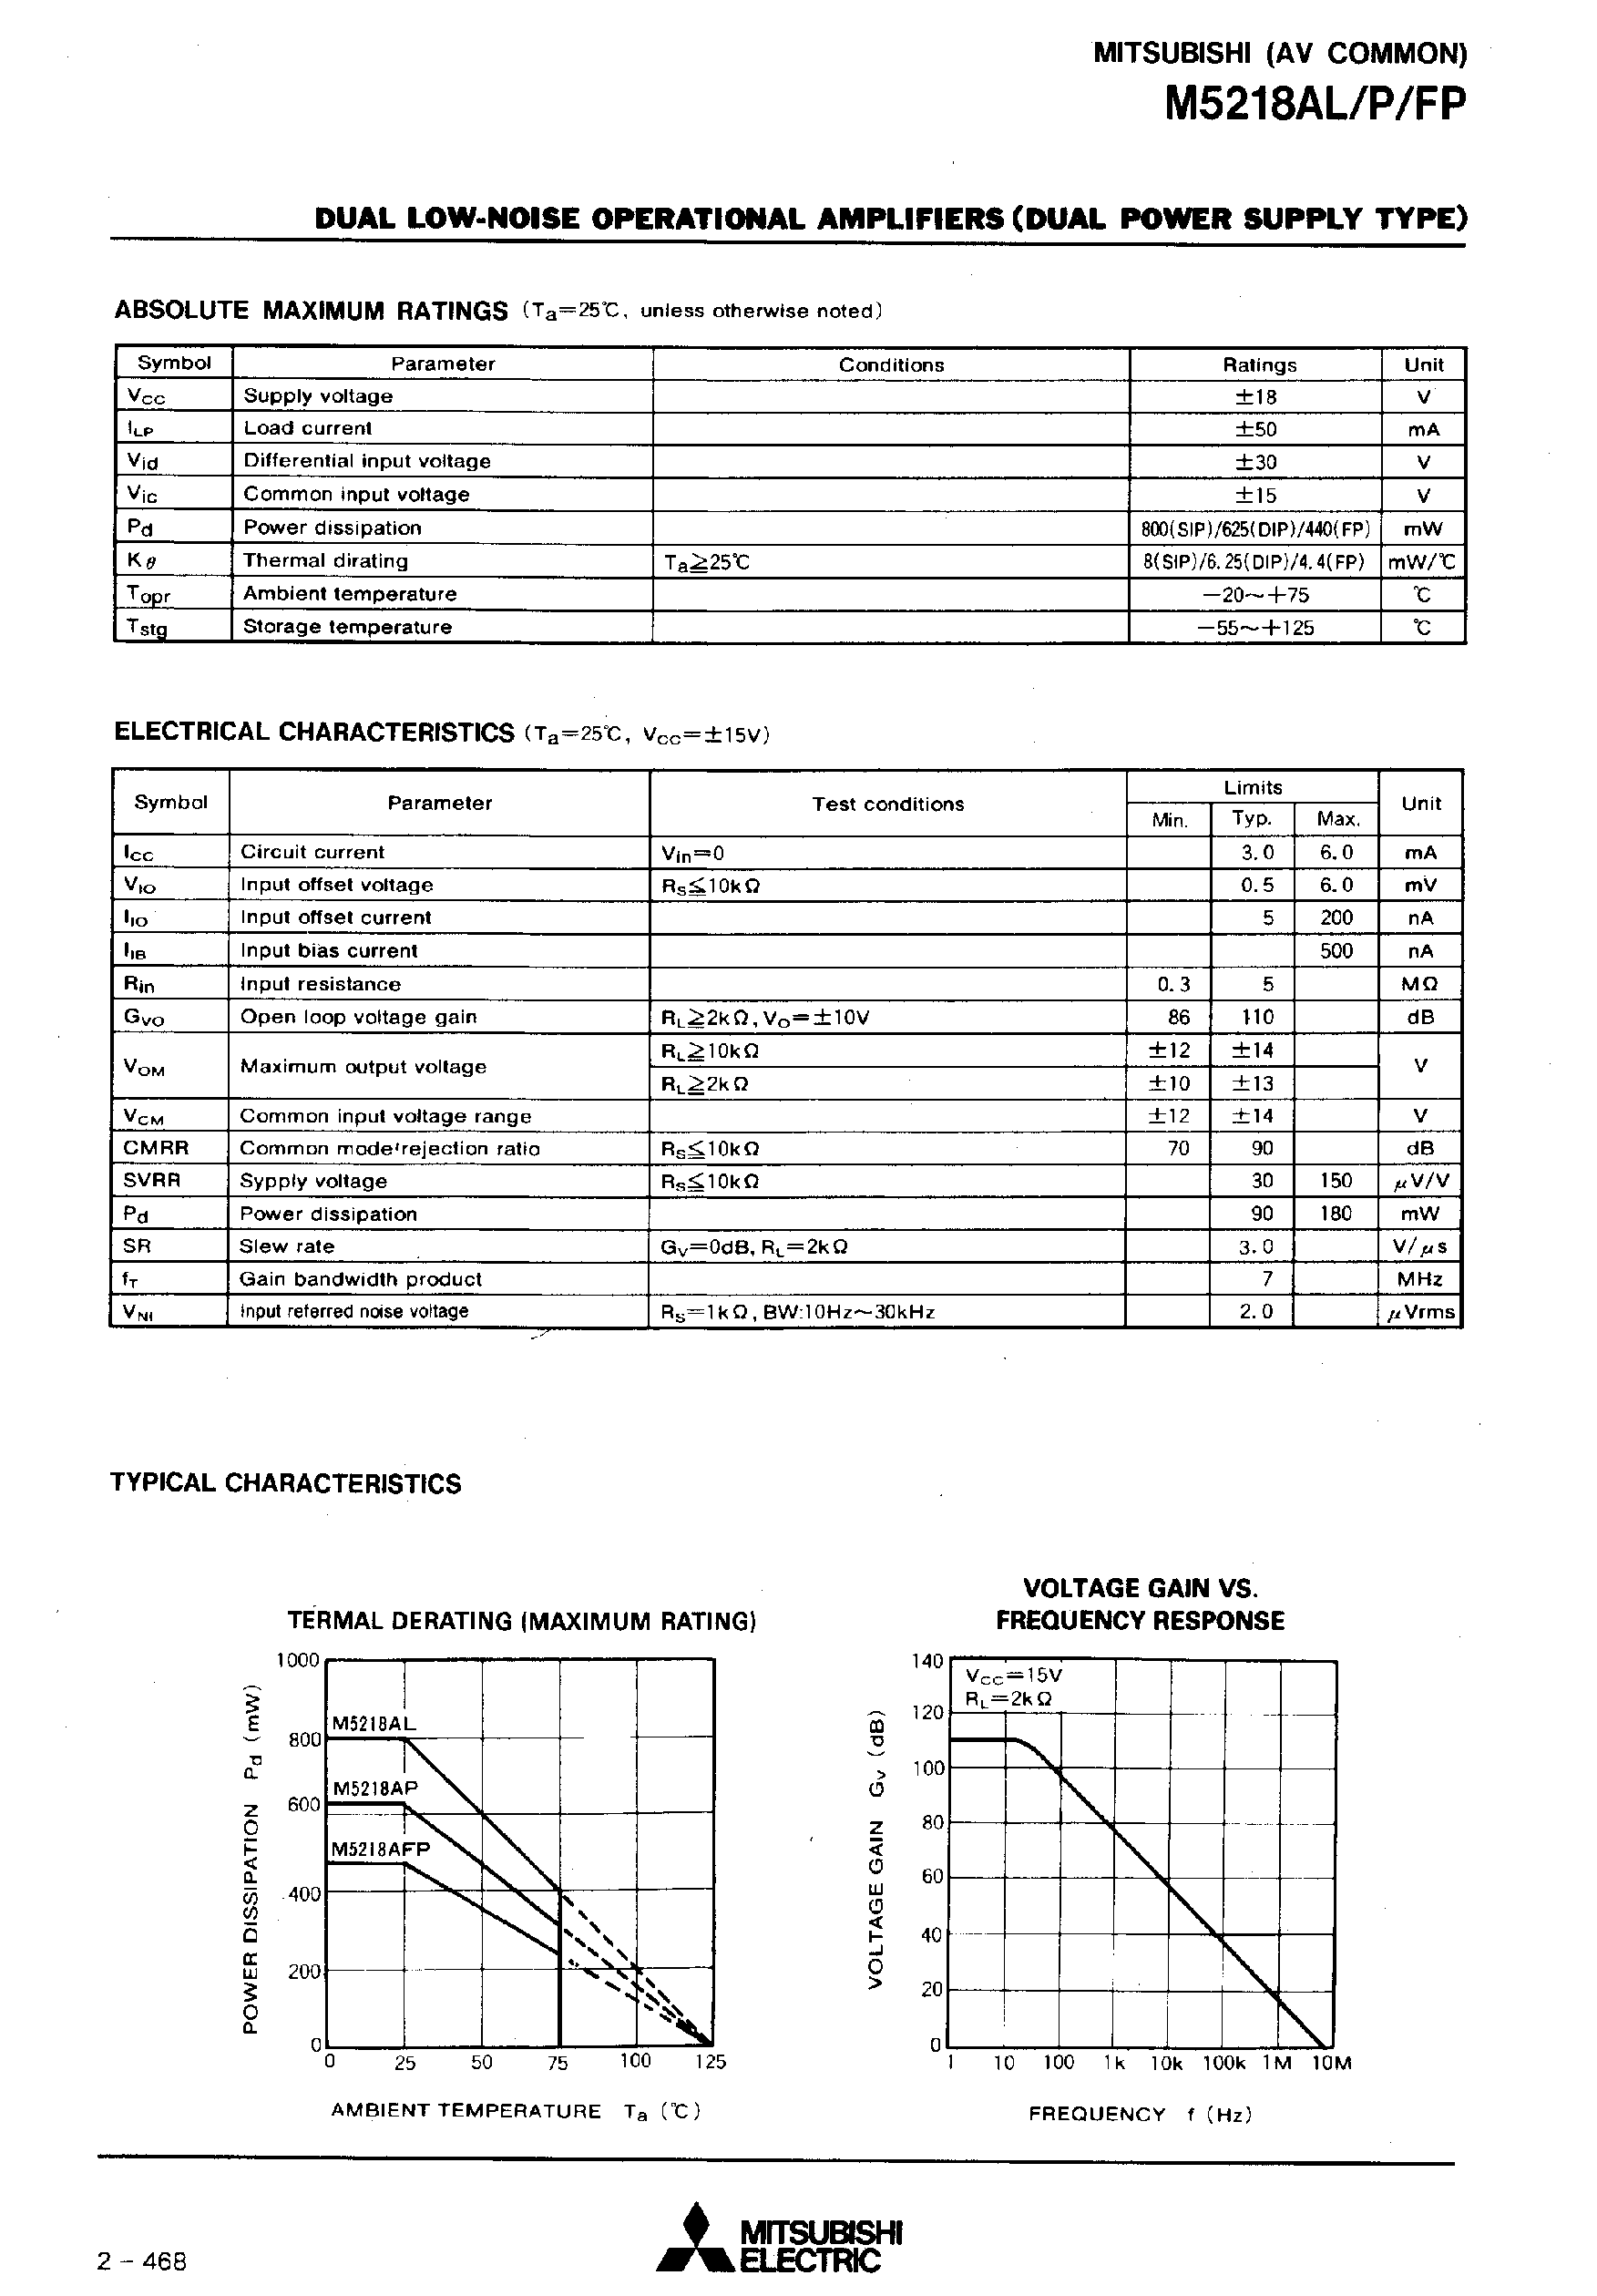 Datasheet M5218AL - DUAL LOW-NOISE OPERATIONAL AMPLIFIERS(DUAL POWER SUPPLY TYPE) page 2